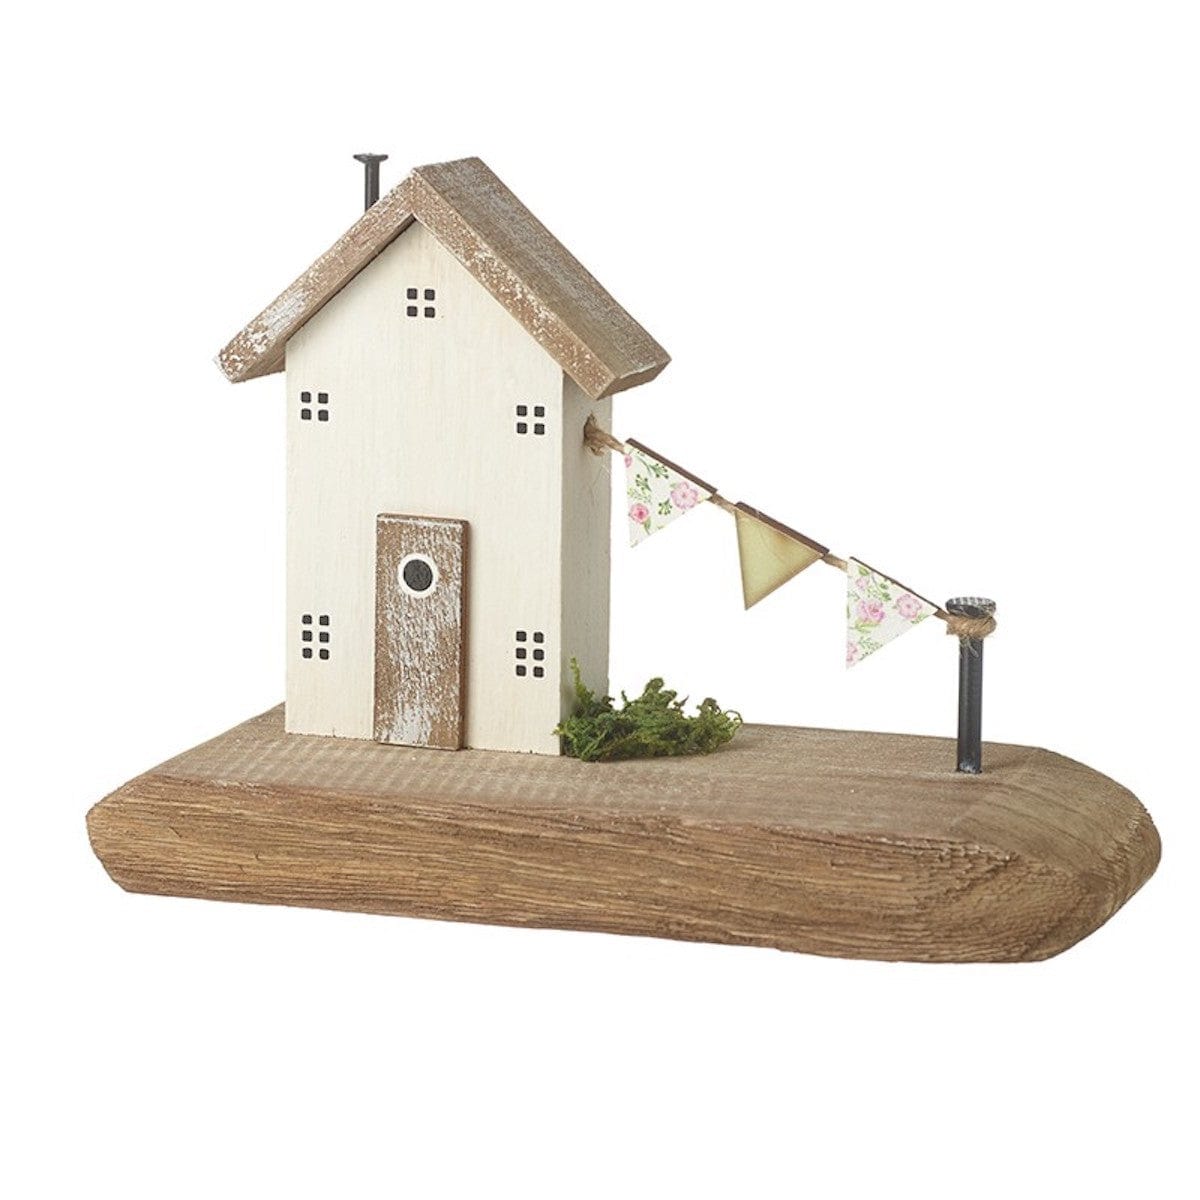 Heaven Sends Home accessories Rustic Wooden House with Garland Ornament